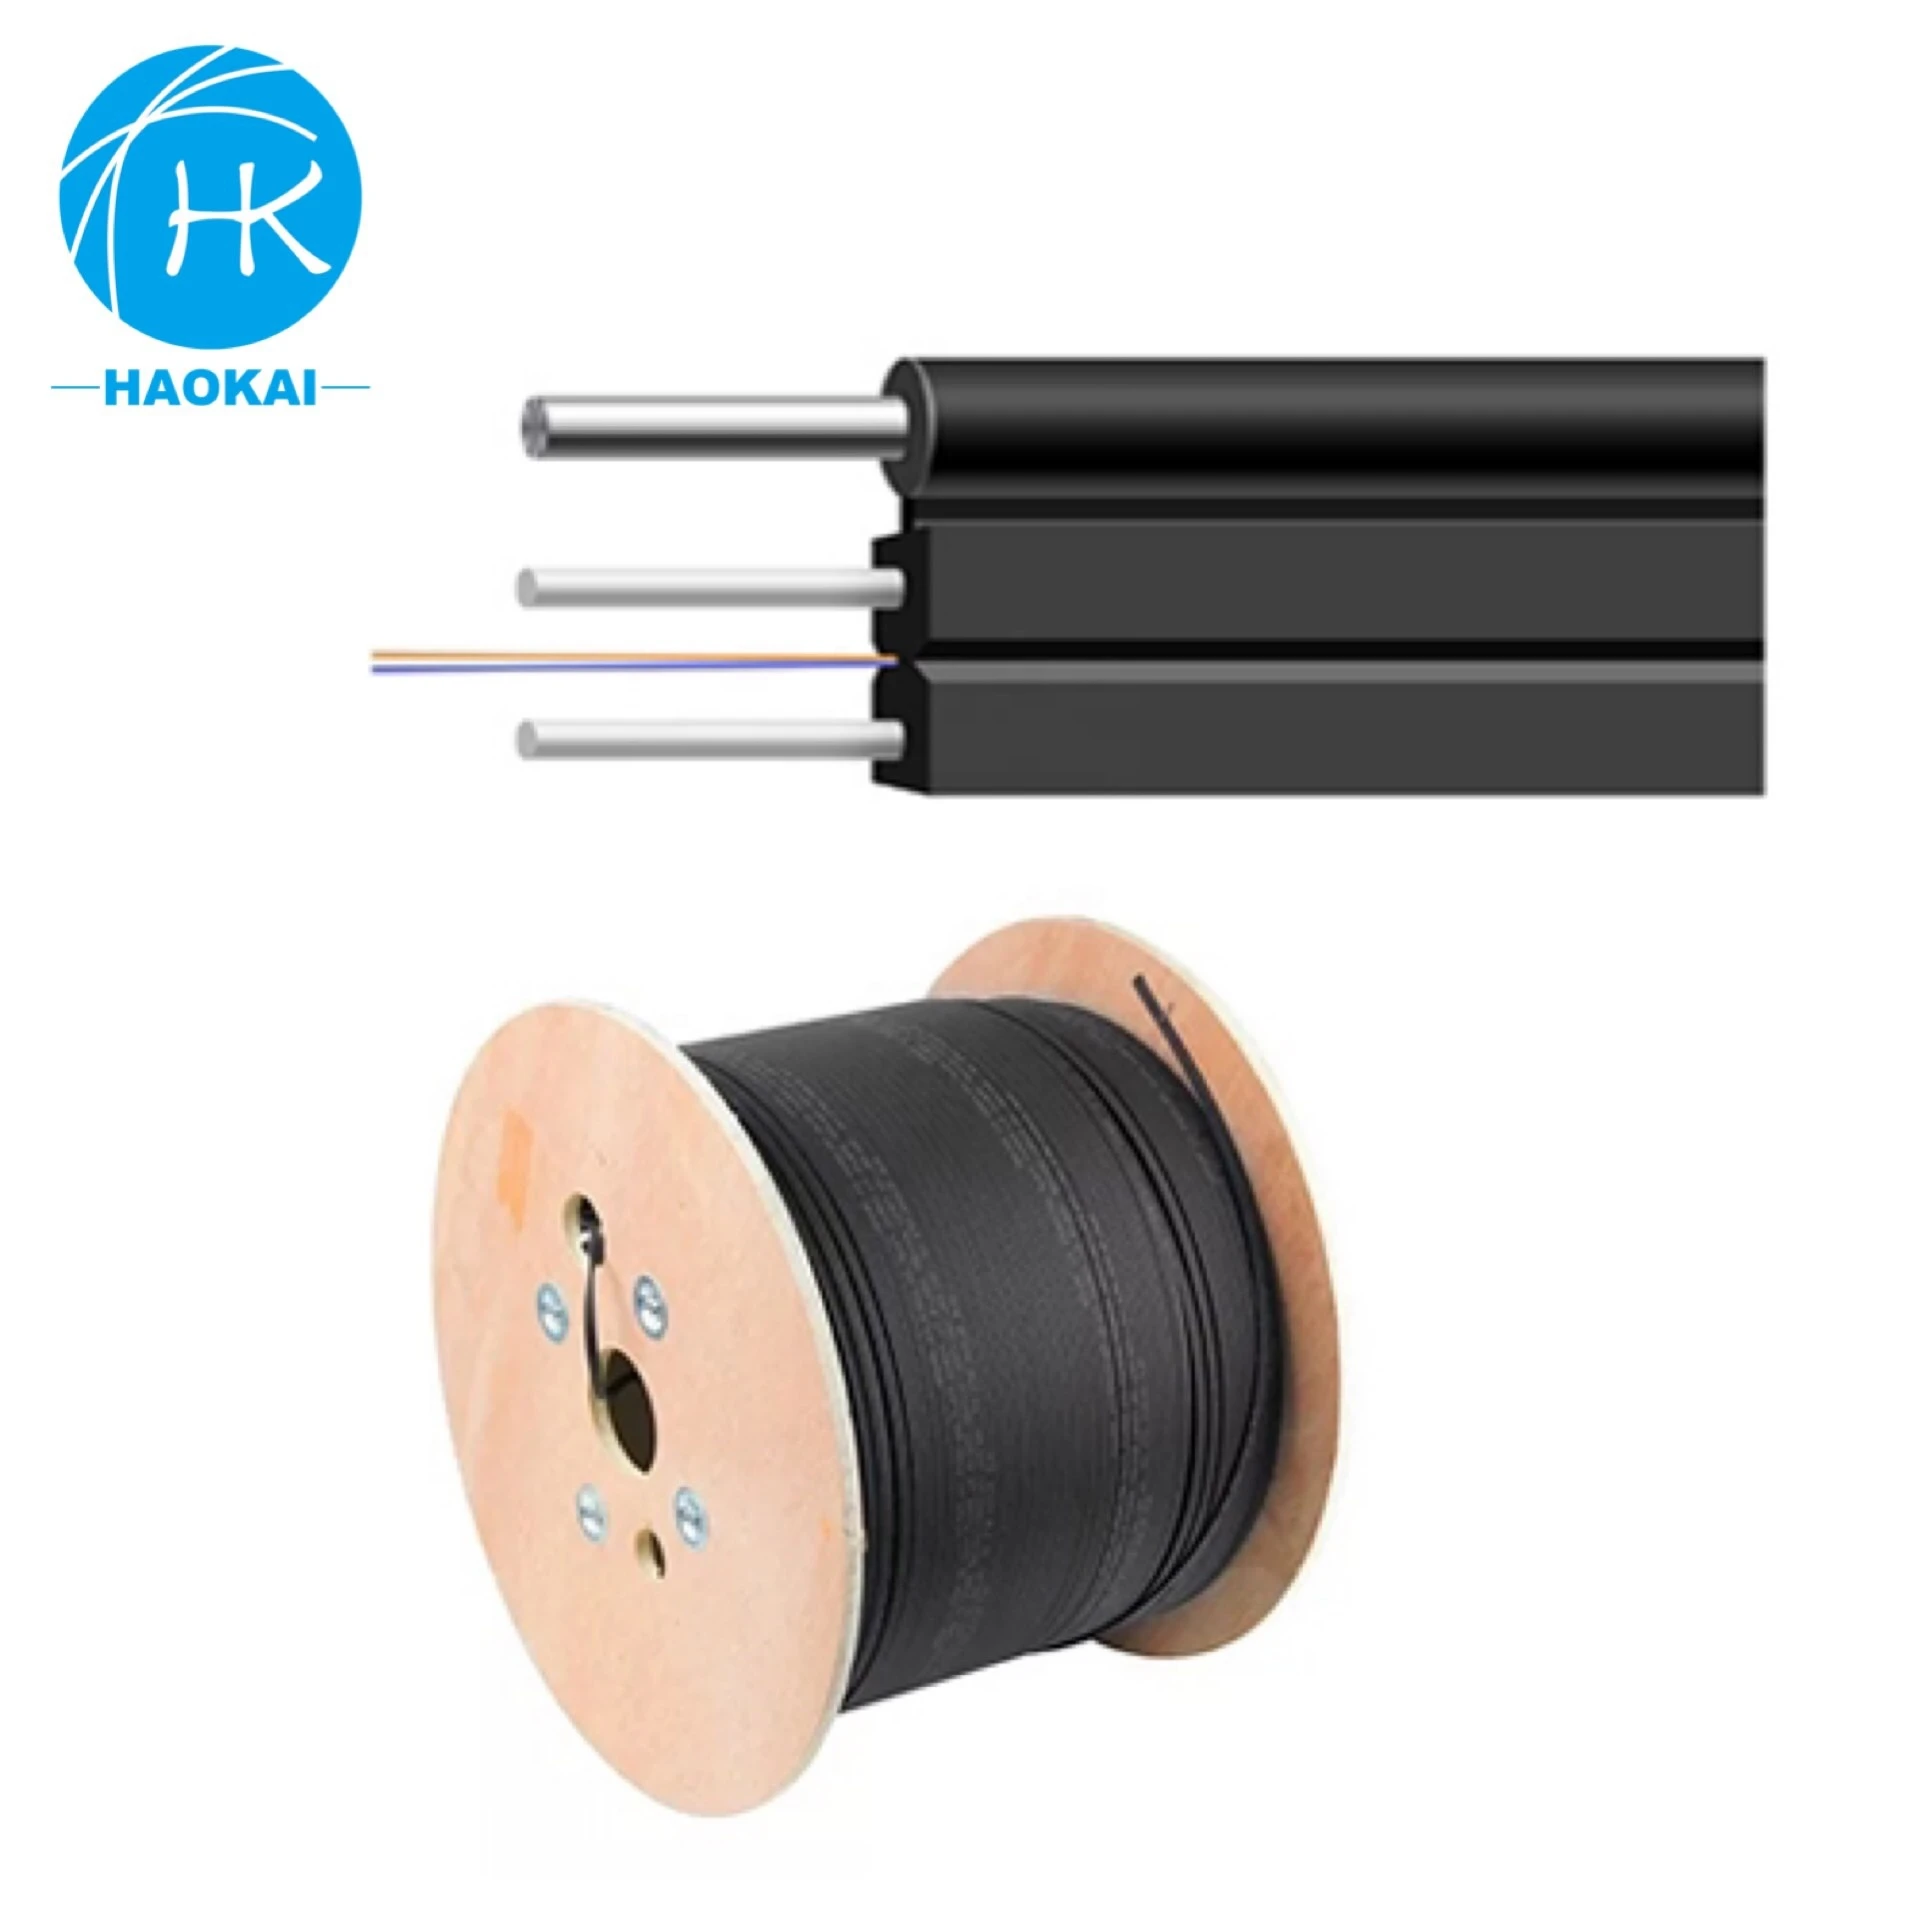 Self-Supporting Butterfly Gjyxfch Ftth Flat Drop Single Mode Fiber Optic Cable